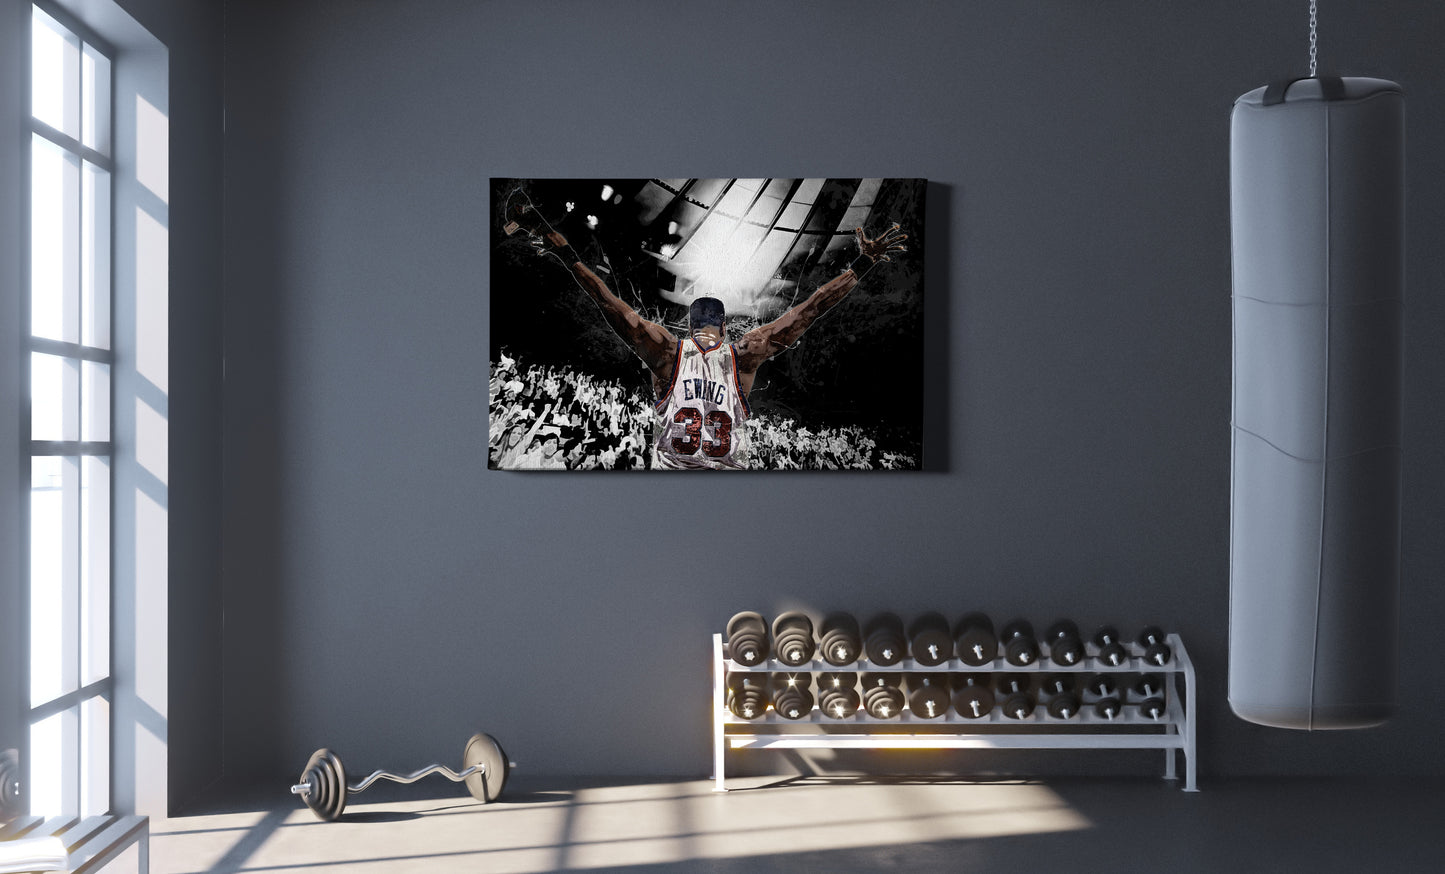 Patrick Ewing Facing Crowd Poster New York Knicks Basketball Painting Hand Made Posters Canvas Print Kids Wall Art Man Cave Gift Home Decor